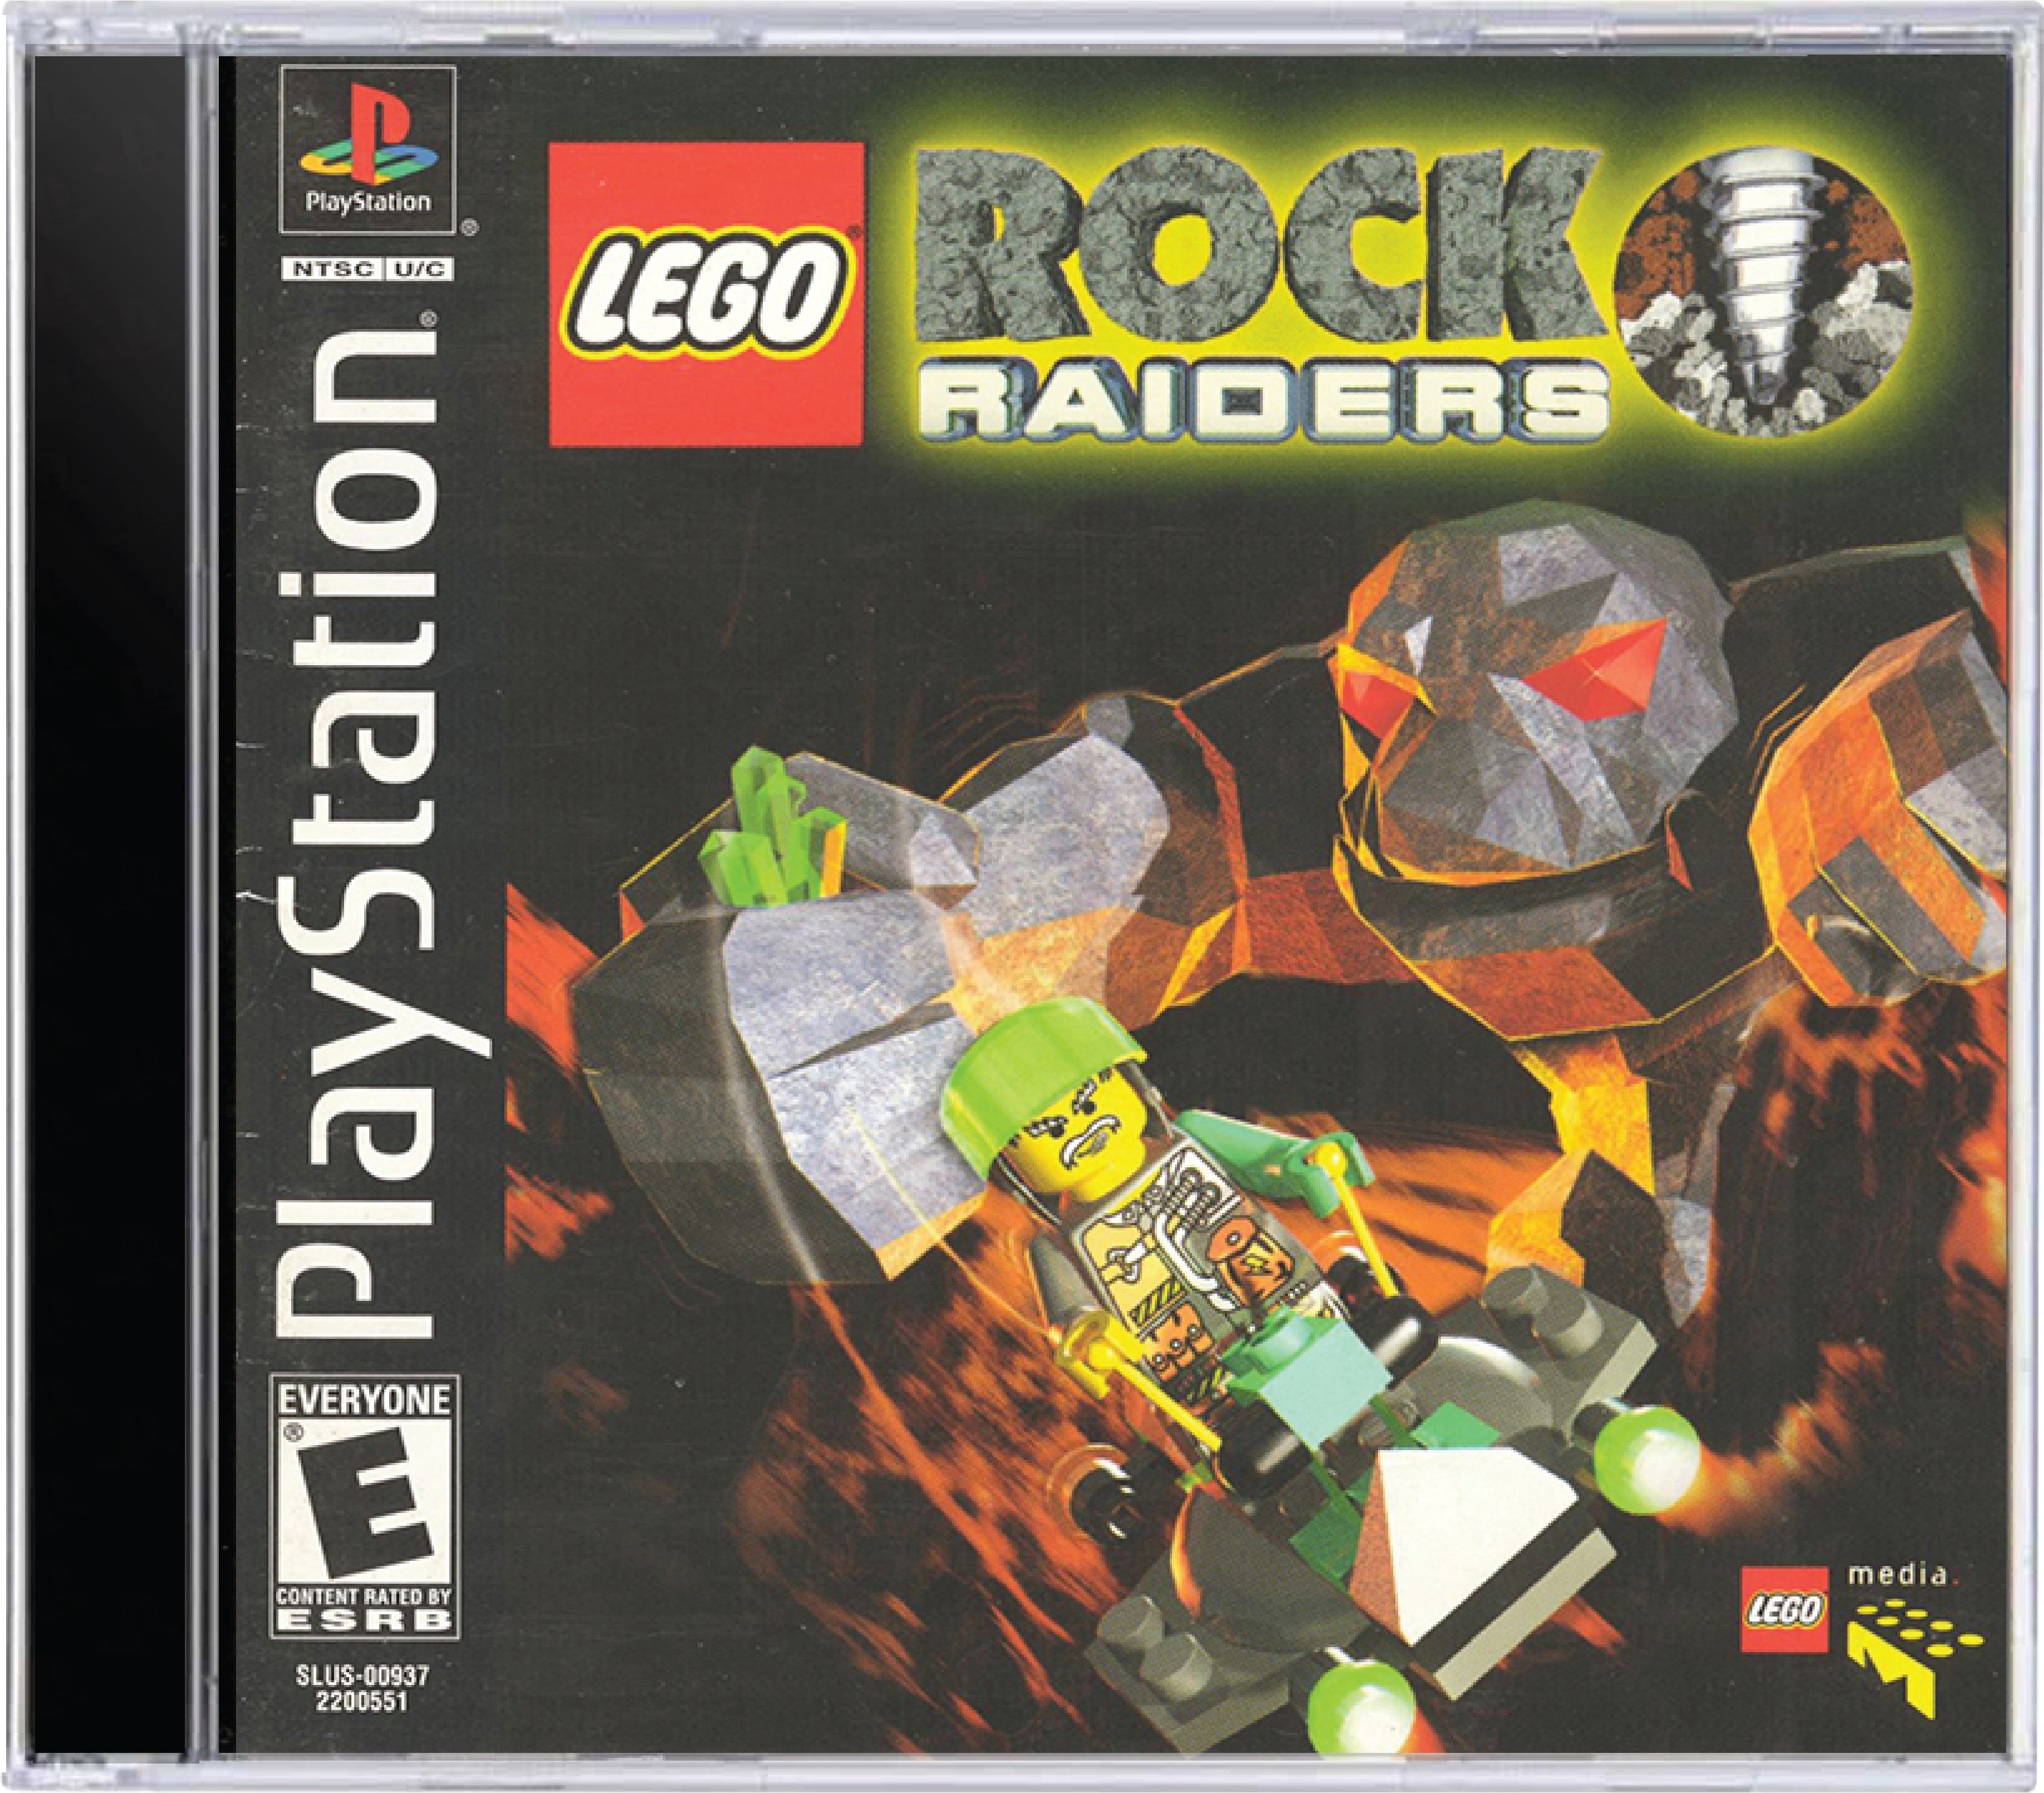 LEGO Rock Raiders Cover Art and Product Photo